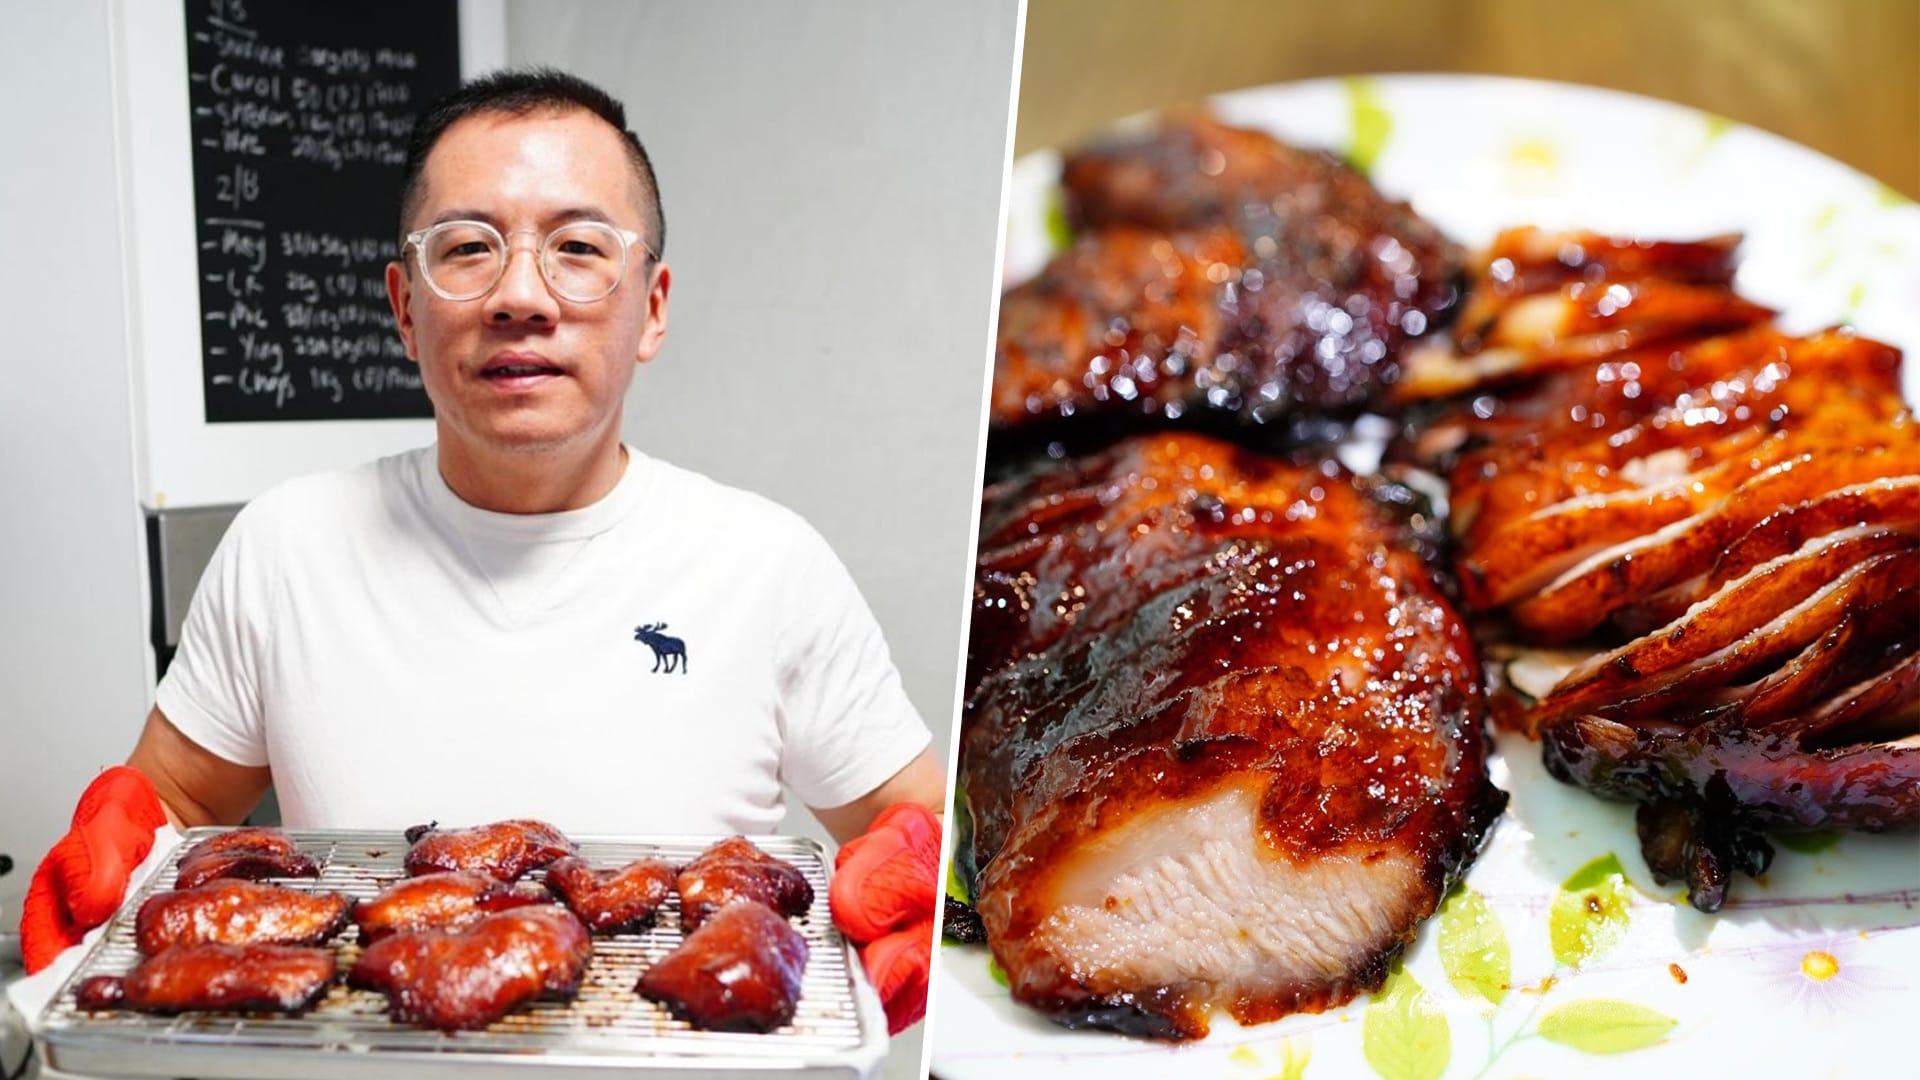 Ex-Construction Manager Sells Char Siew After Losing Job Due To Covid-19 Downturn